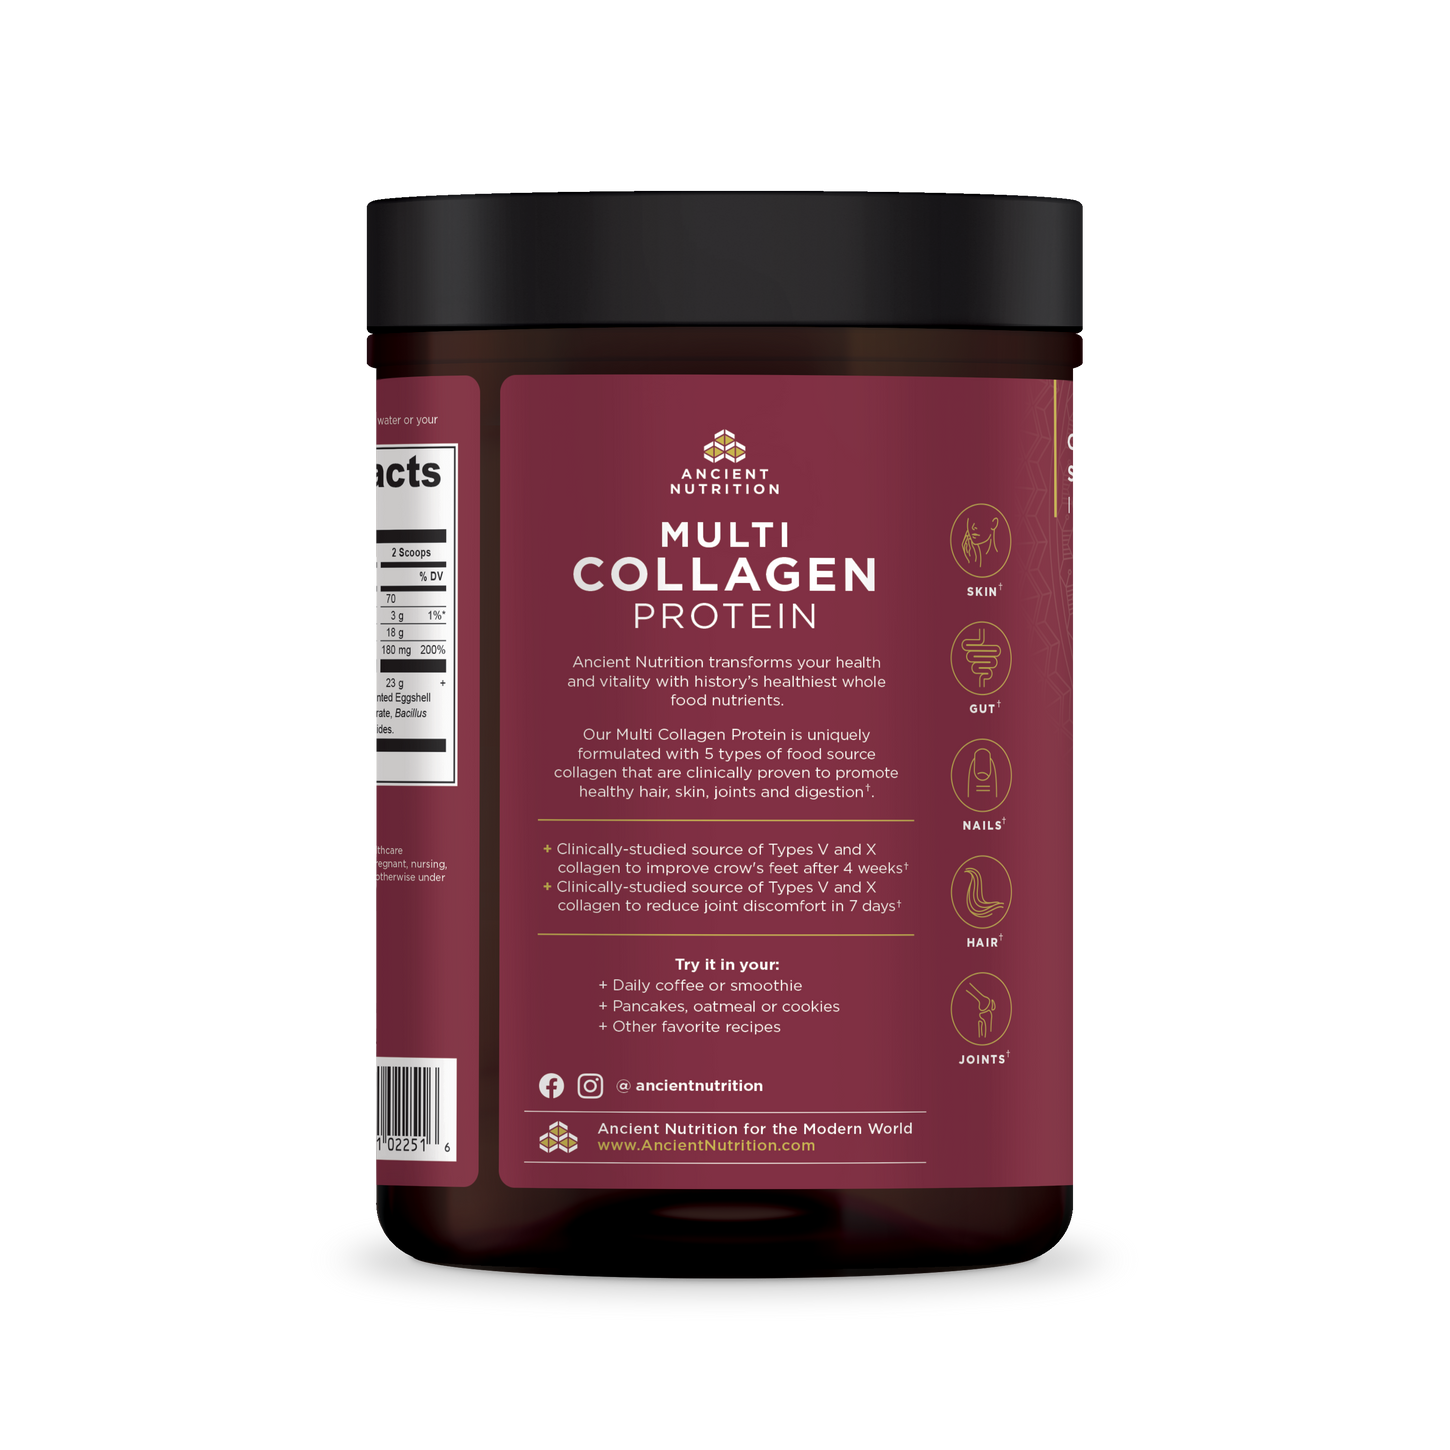 Image 2 of Multi Collagen Protein Powder Pure - 3 Pack - DR Exclusive Offer